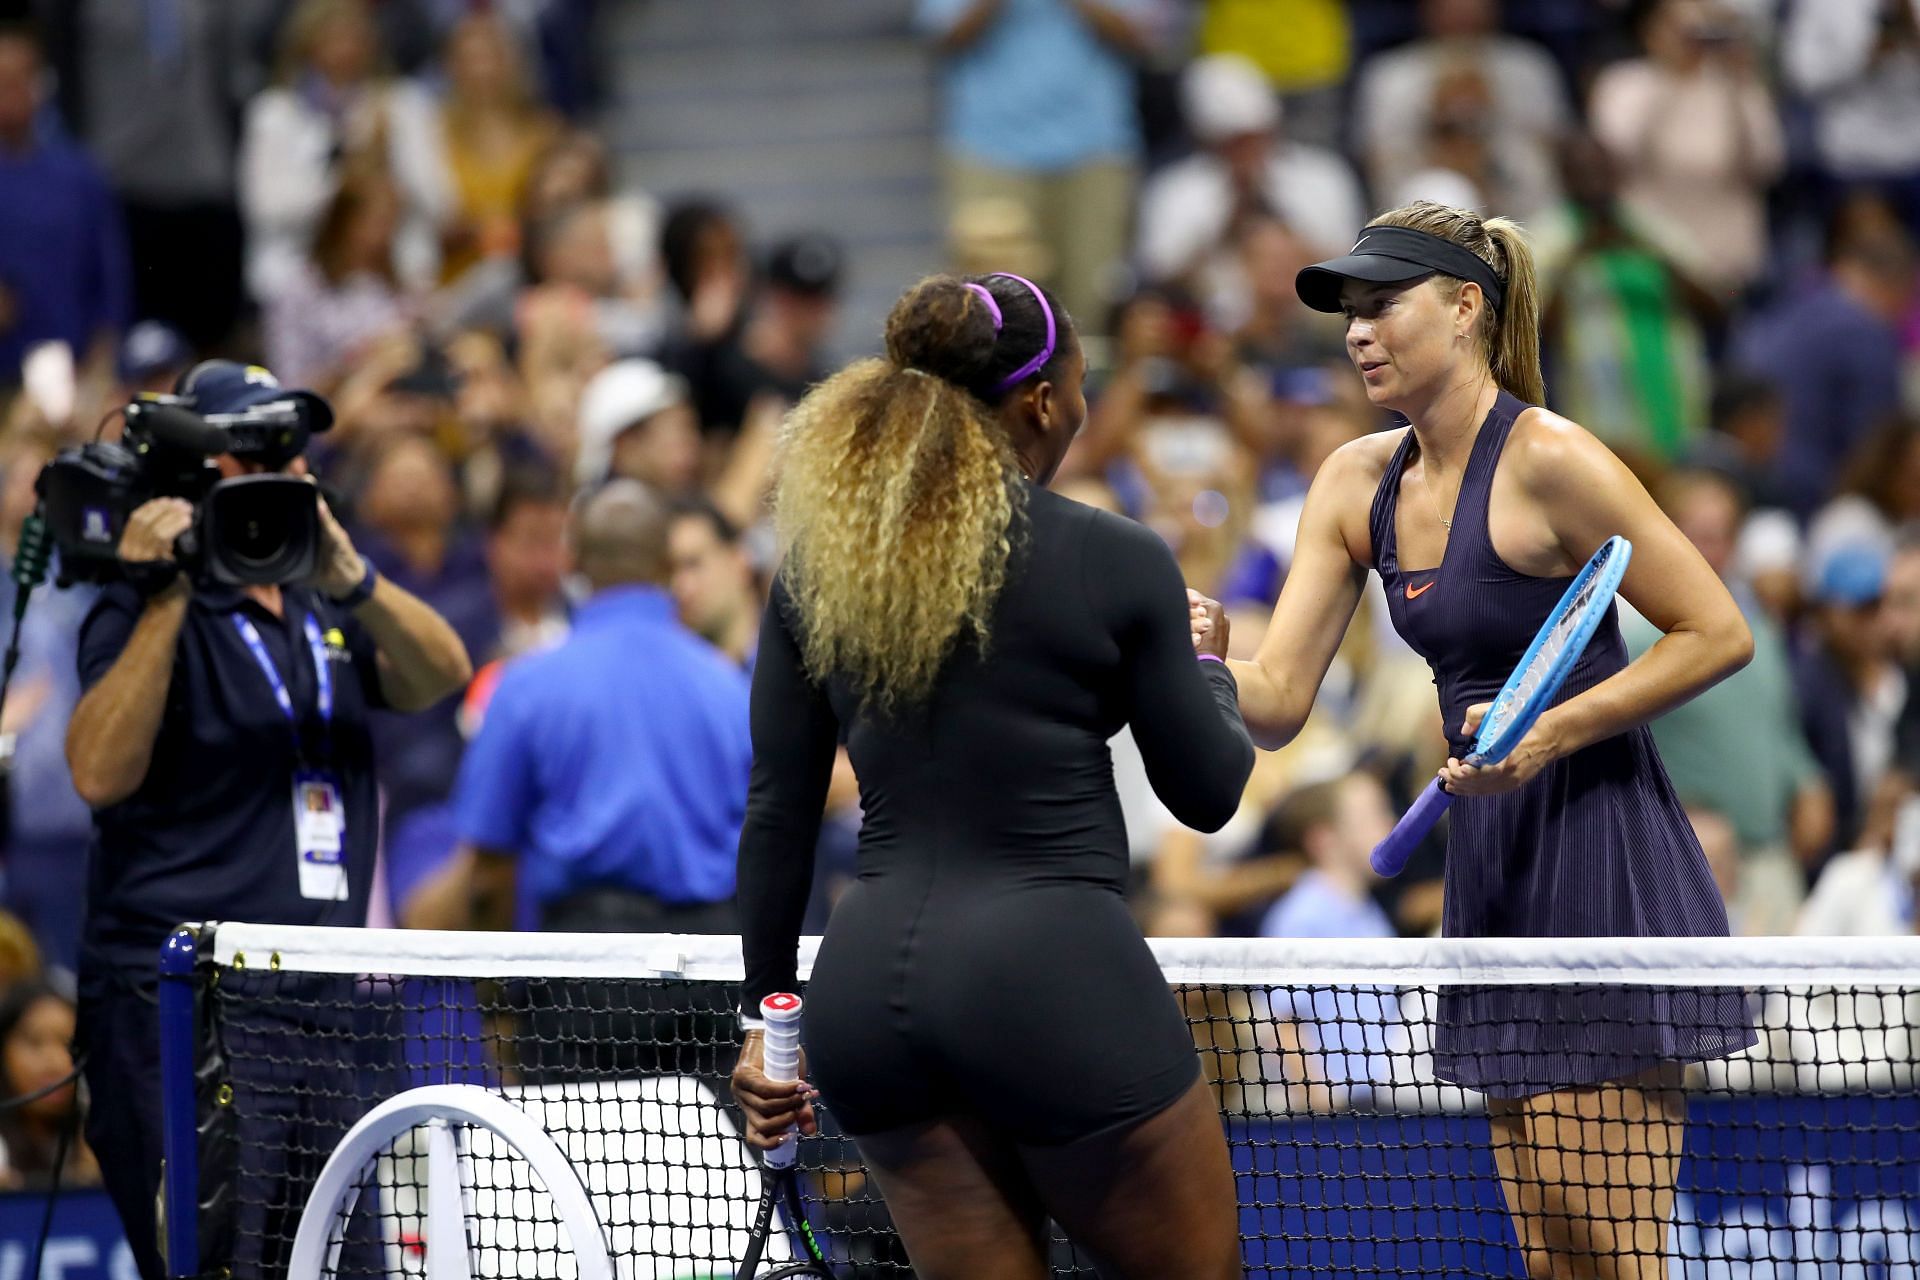 Serena Williams and Maria Sharapova after their encounter at the 2019 US Open